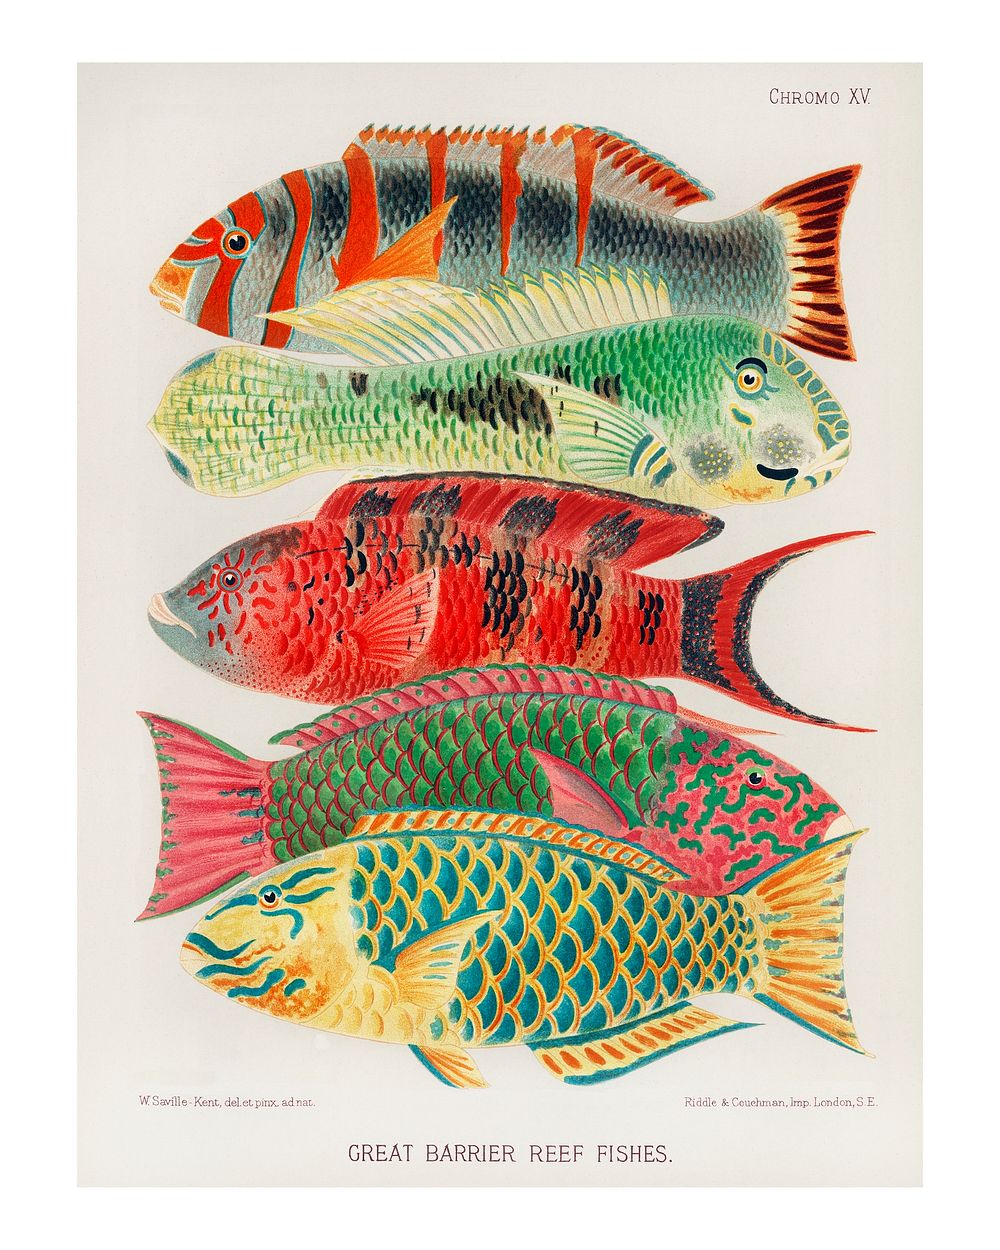 Great Barrier Reef Fishes vintage illustration by William Saville-Kent. Digitally enhanced by rawpixel.